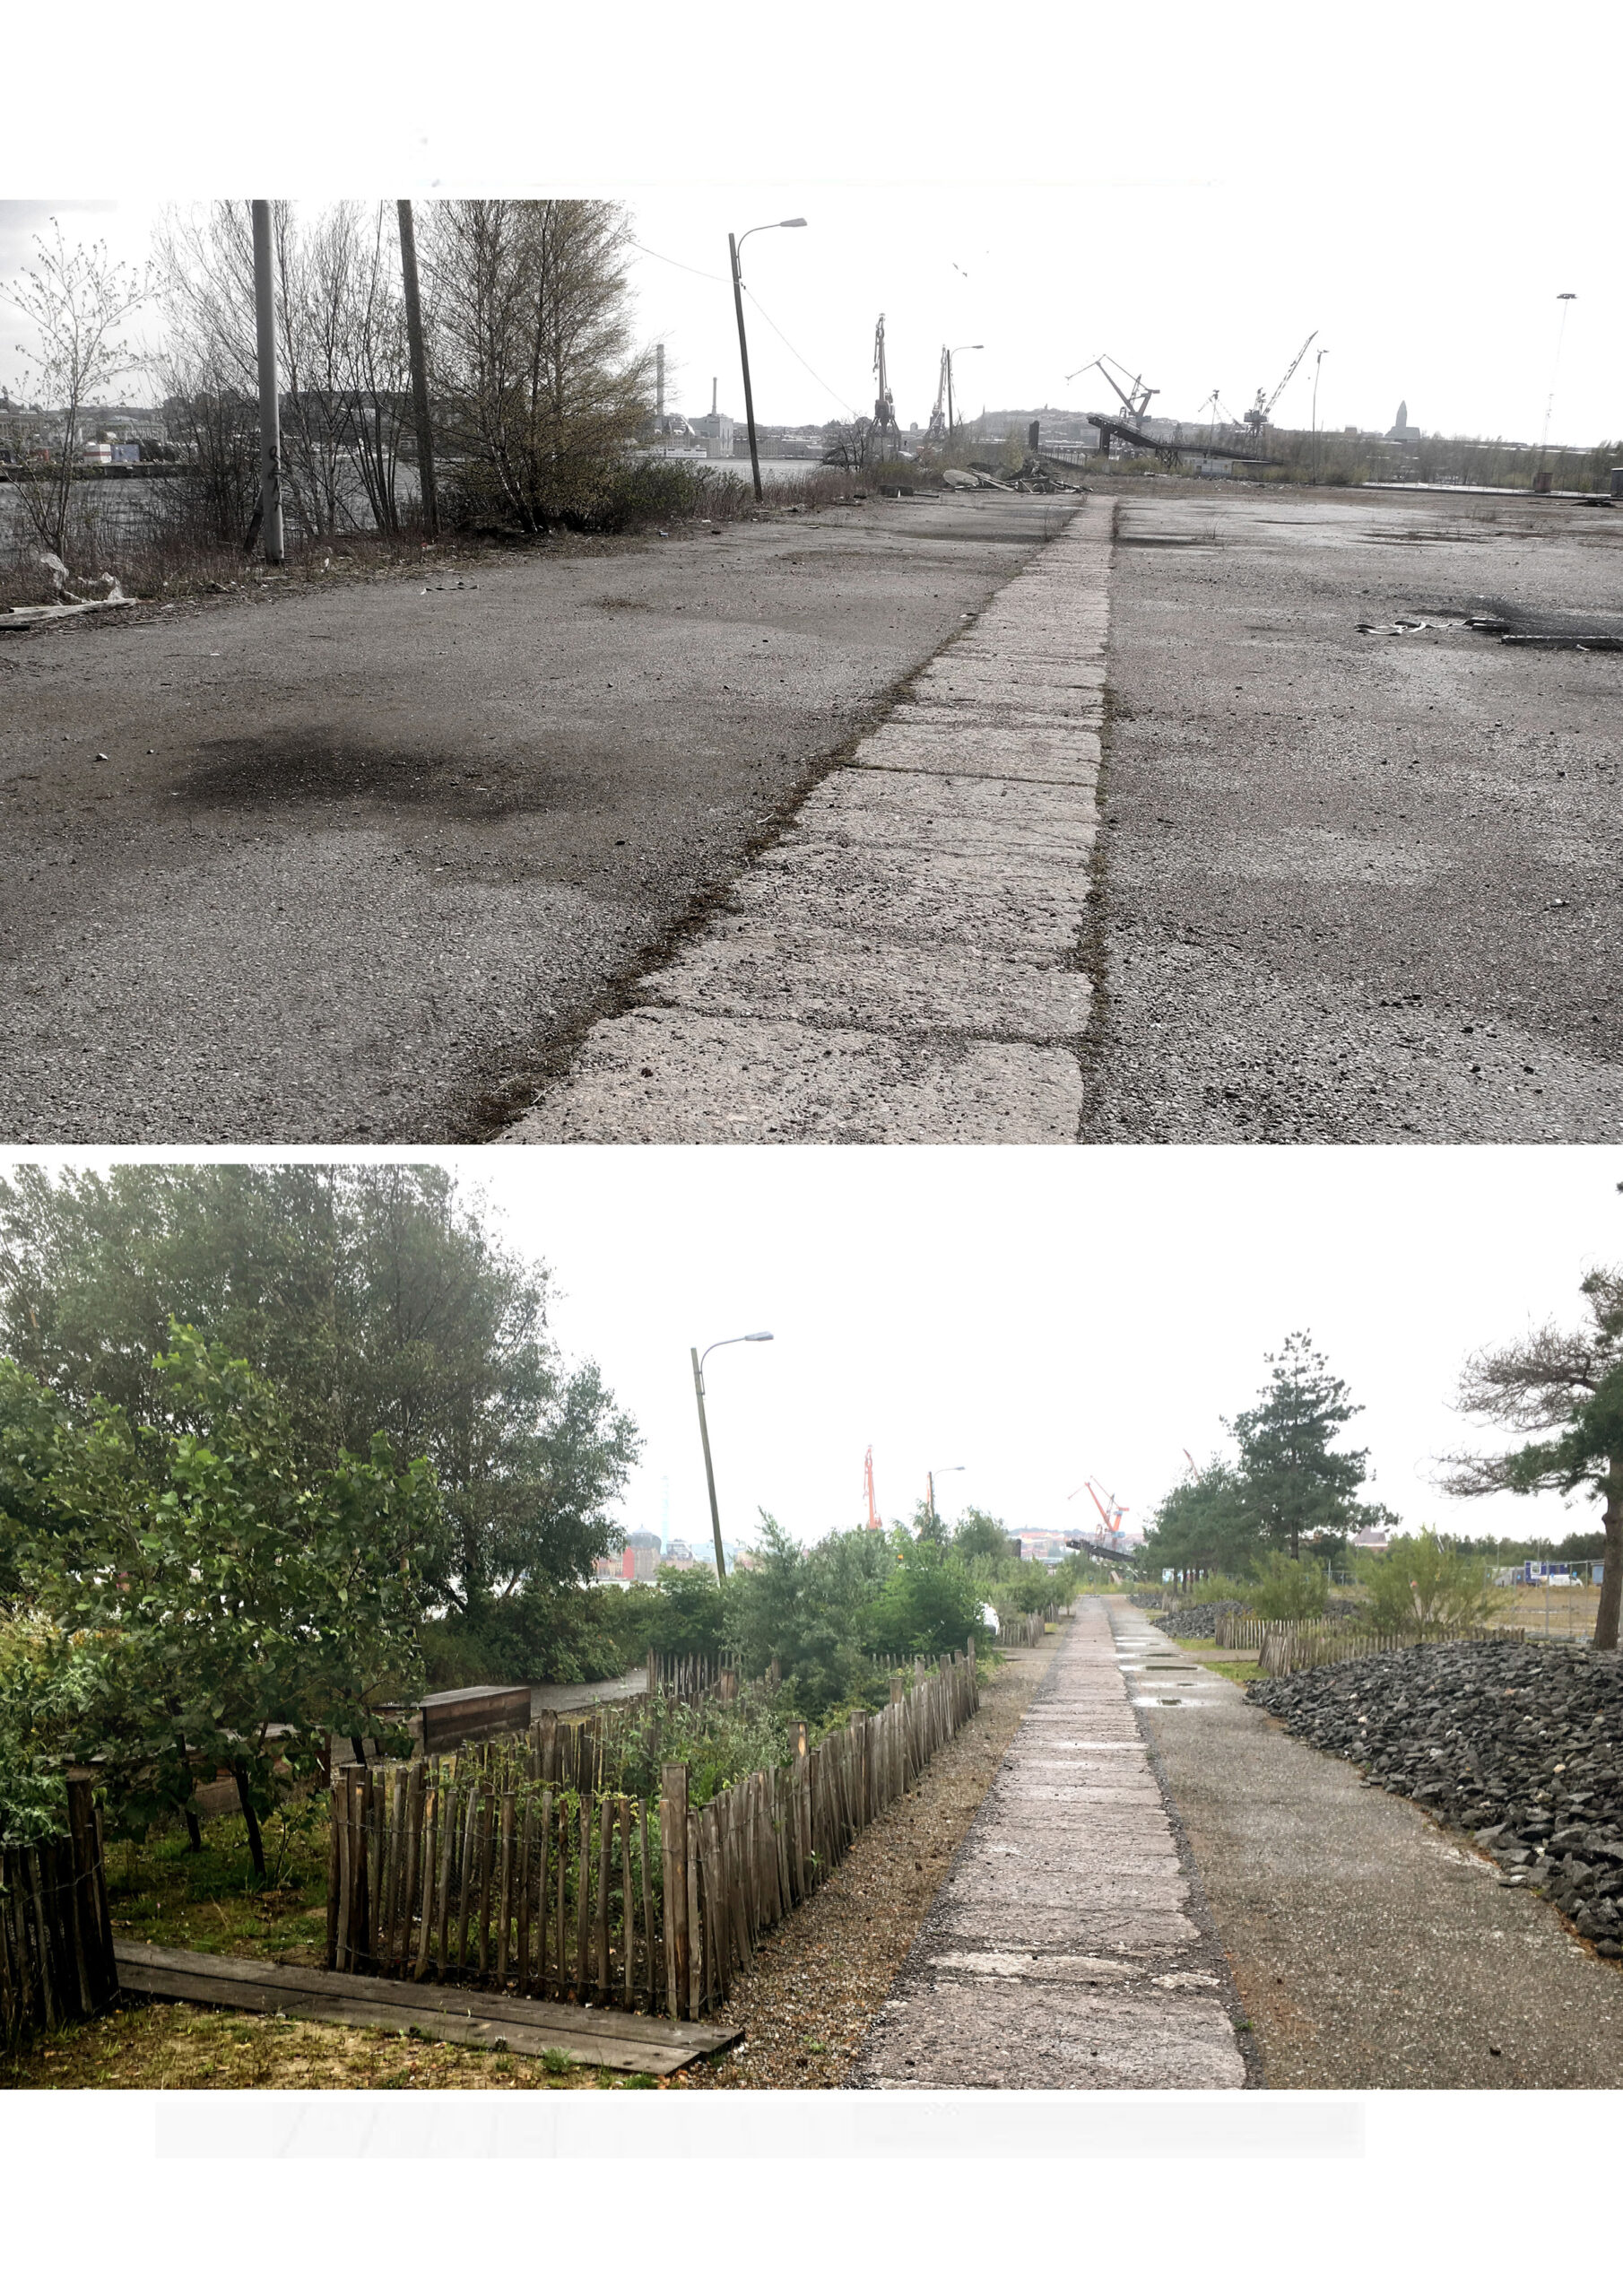 Temporary design with vegetation, before and after